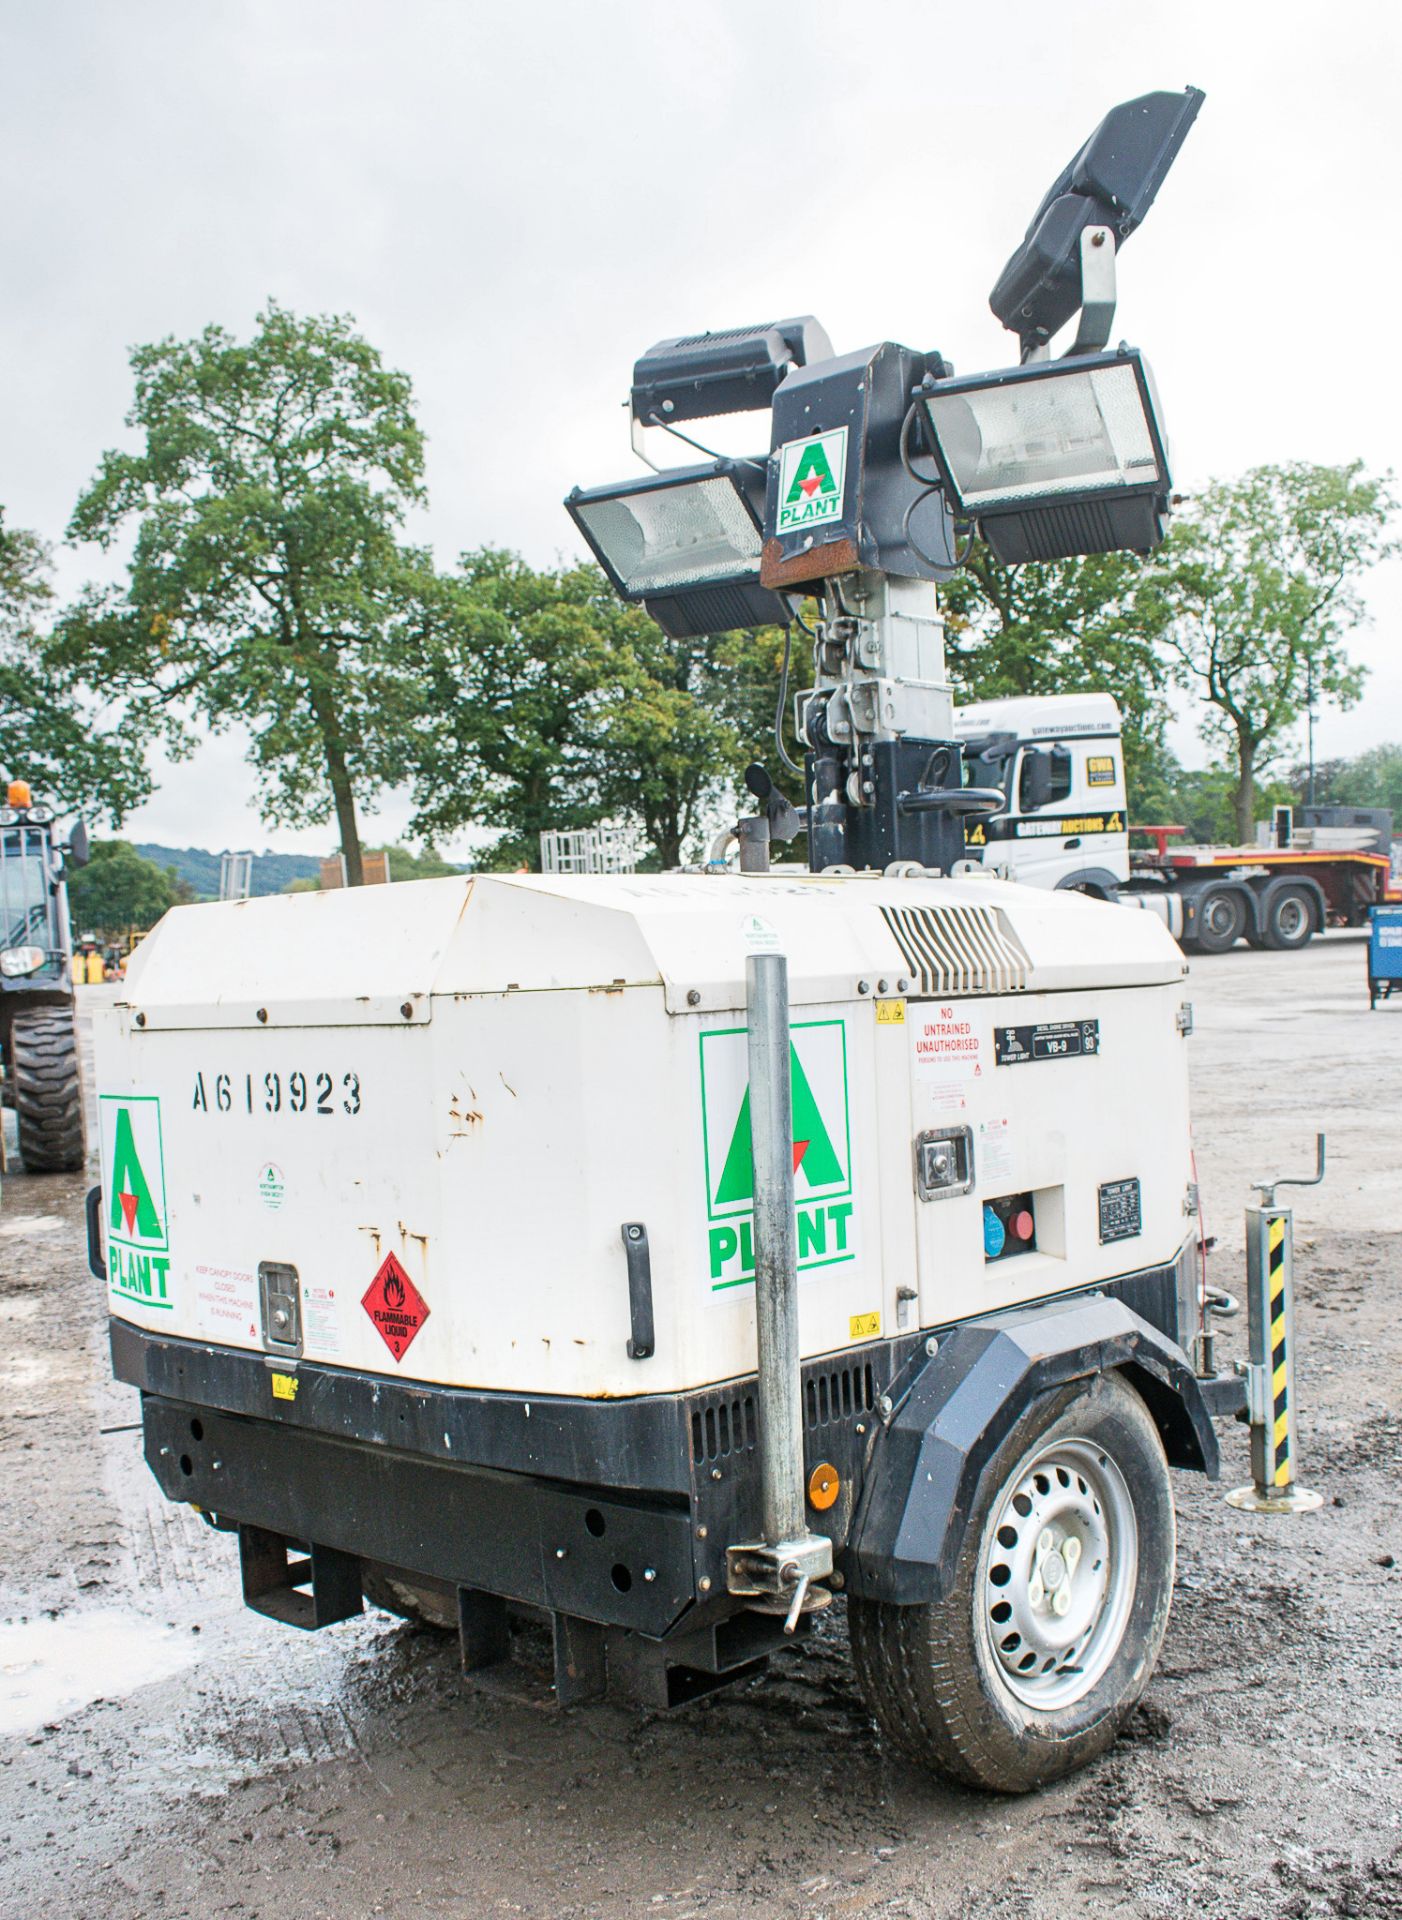 Tower Light VB-9 diesel driven mobile lighting tower Year: 2013 S/N: 1302900 Recorded Hours: 2746 - Image 4 of 9